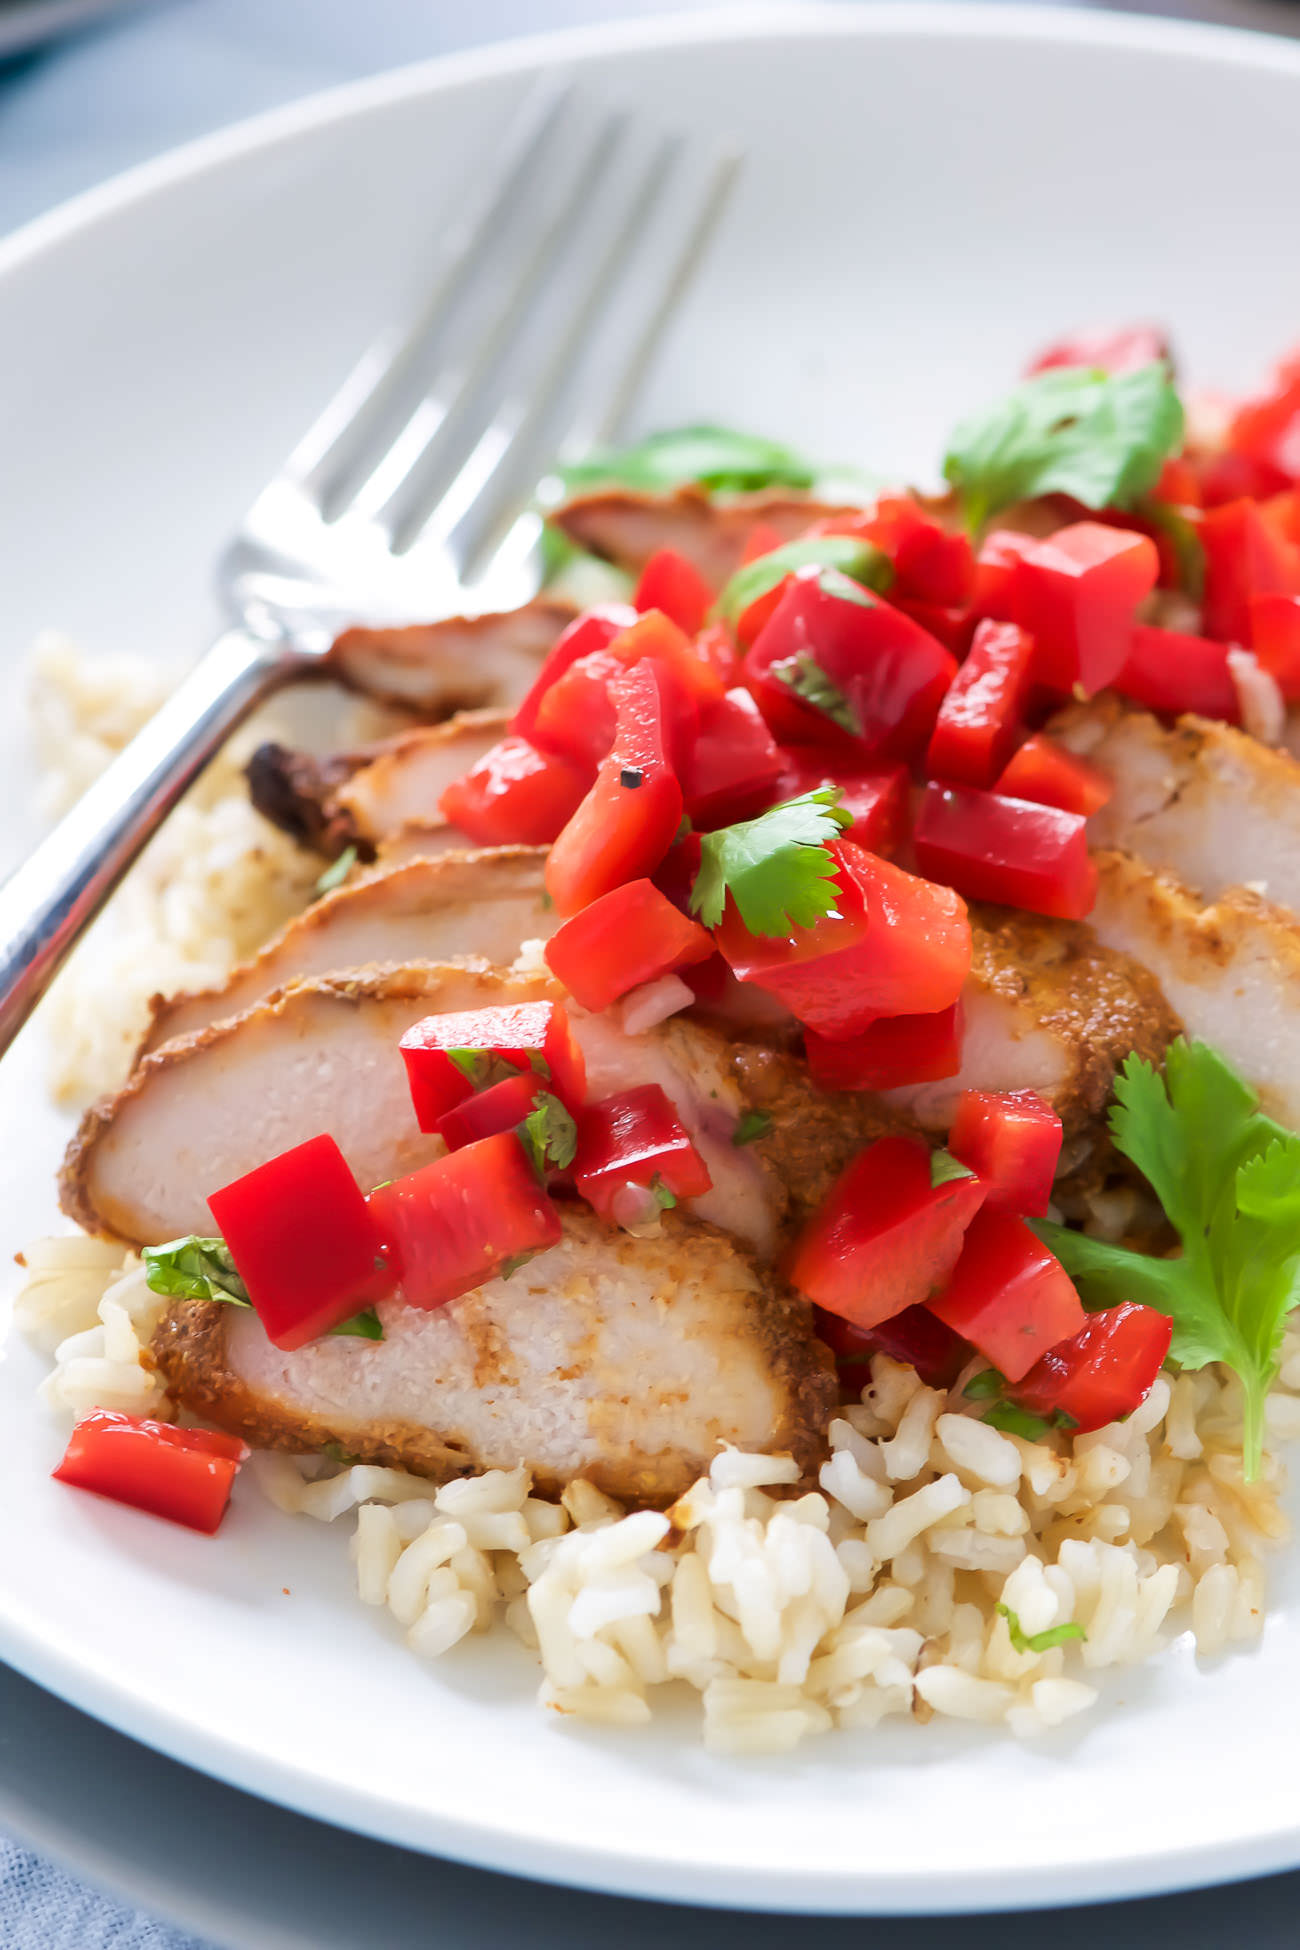 Tequila Honey Lime Chicken - juicy chicken marinated in a smoky chipotle, a touch of honey and chili powder then finished with a super quick and fresh red pepper salsa!